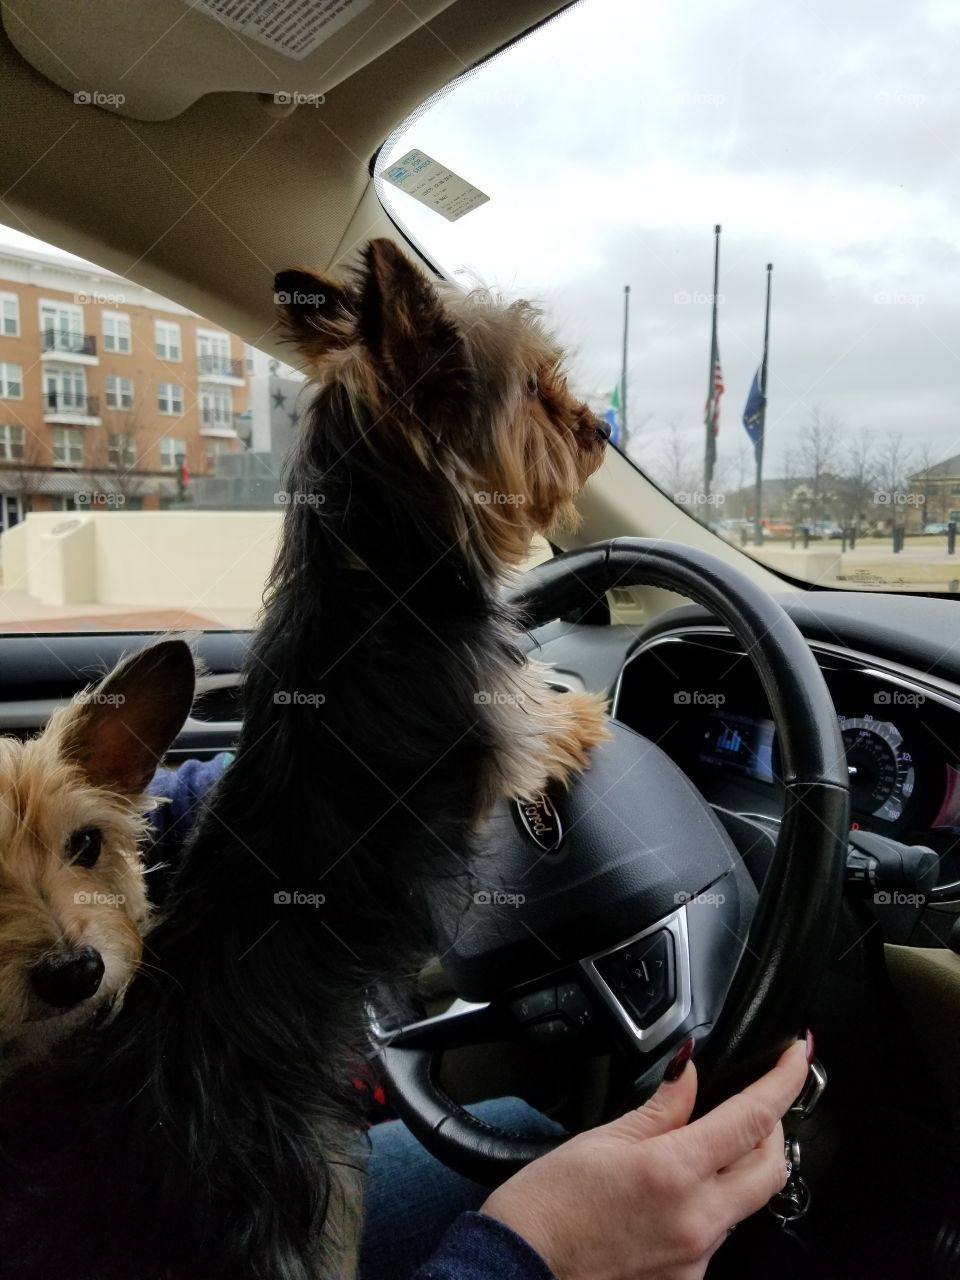 Just a dog driving a car